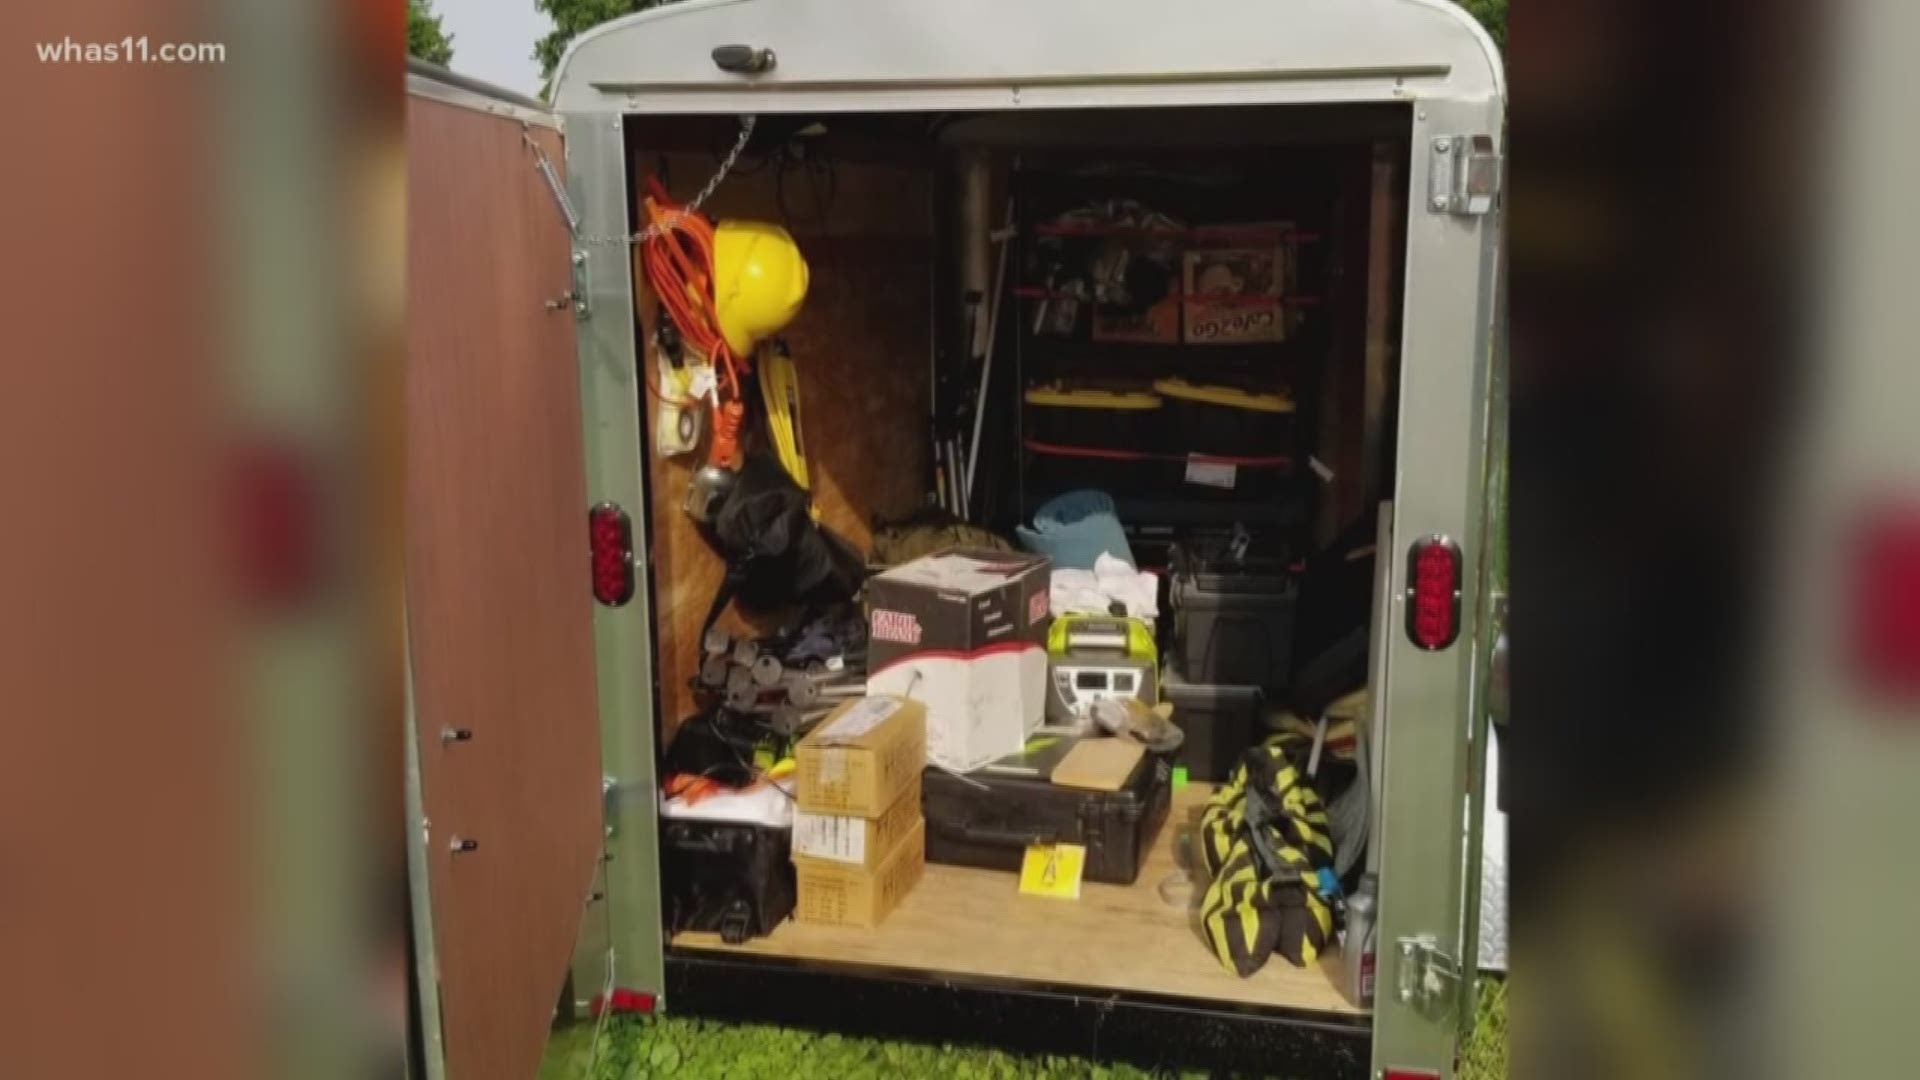 To the search dog association, this trailer held their entire operation with thousands of dollars worth of equipment.